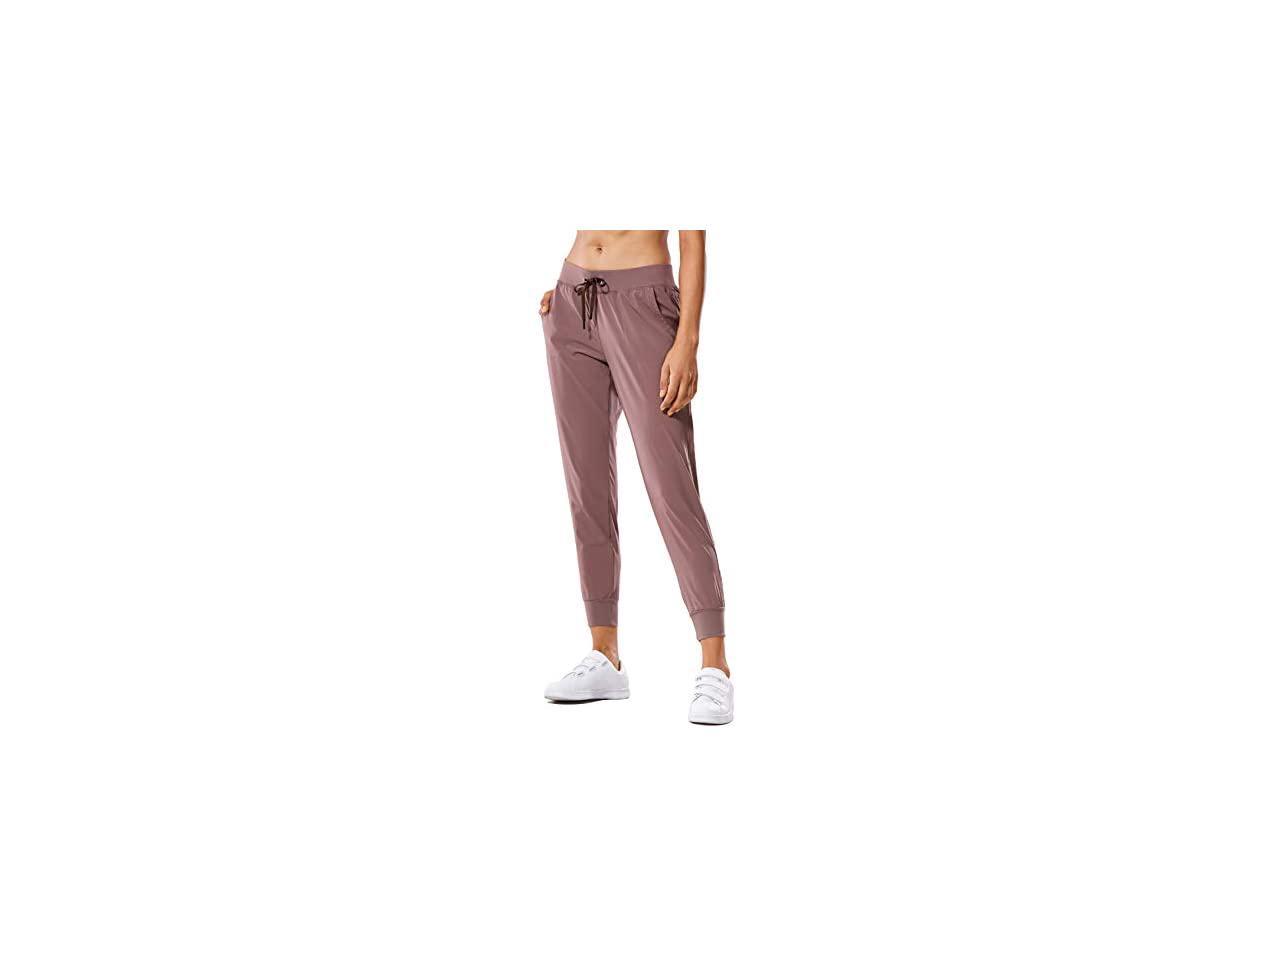 YOGA Womens Lightweight Joggers Pants with Pockets Drawstring Workout  Running Pants with Elastic Waist Mauve L US 12 - Newegg.com